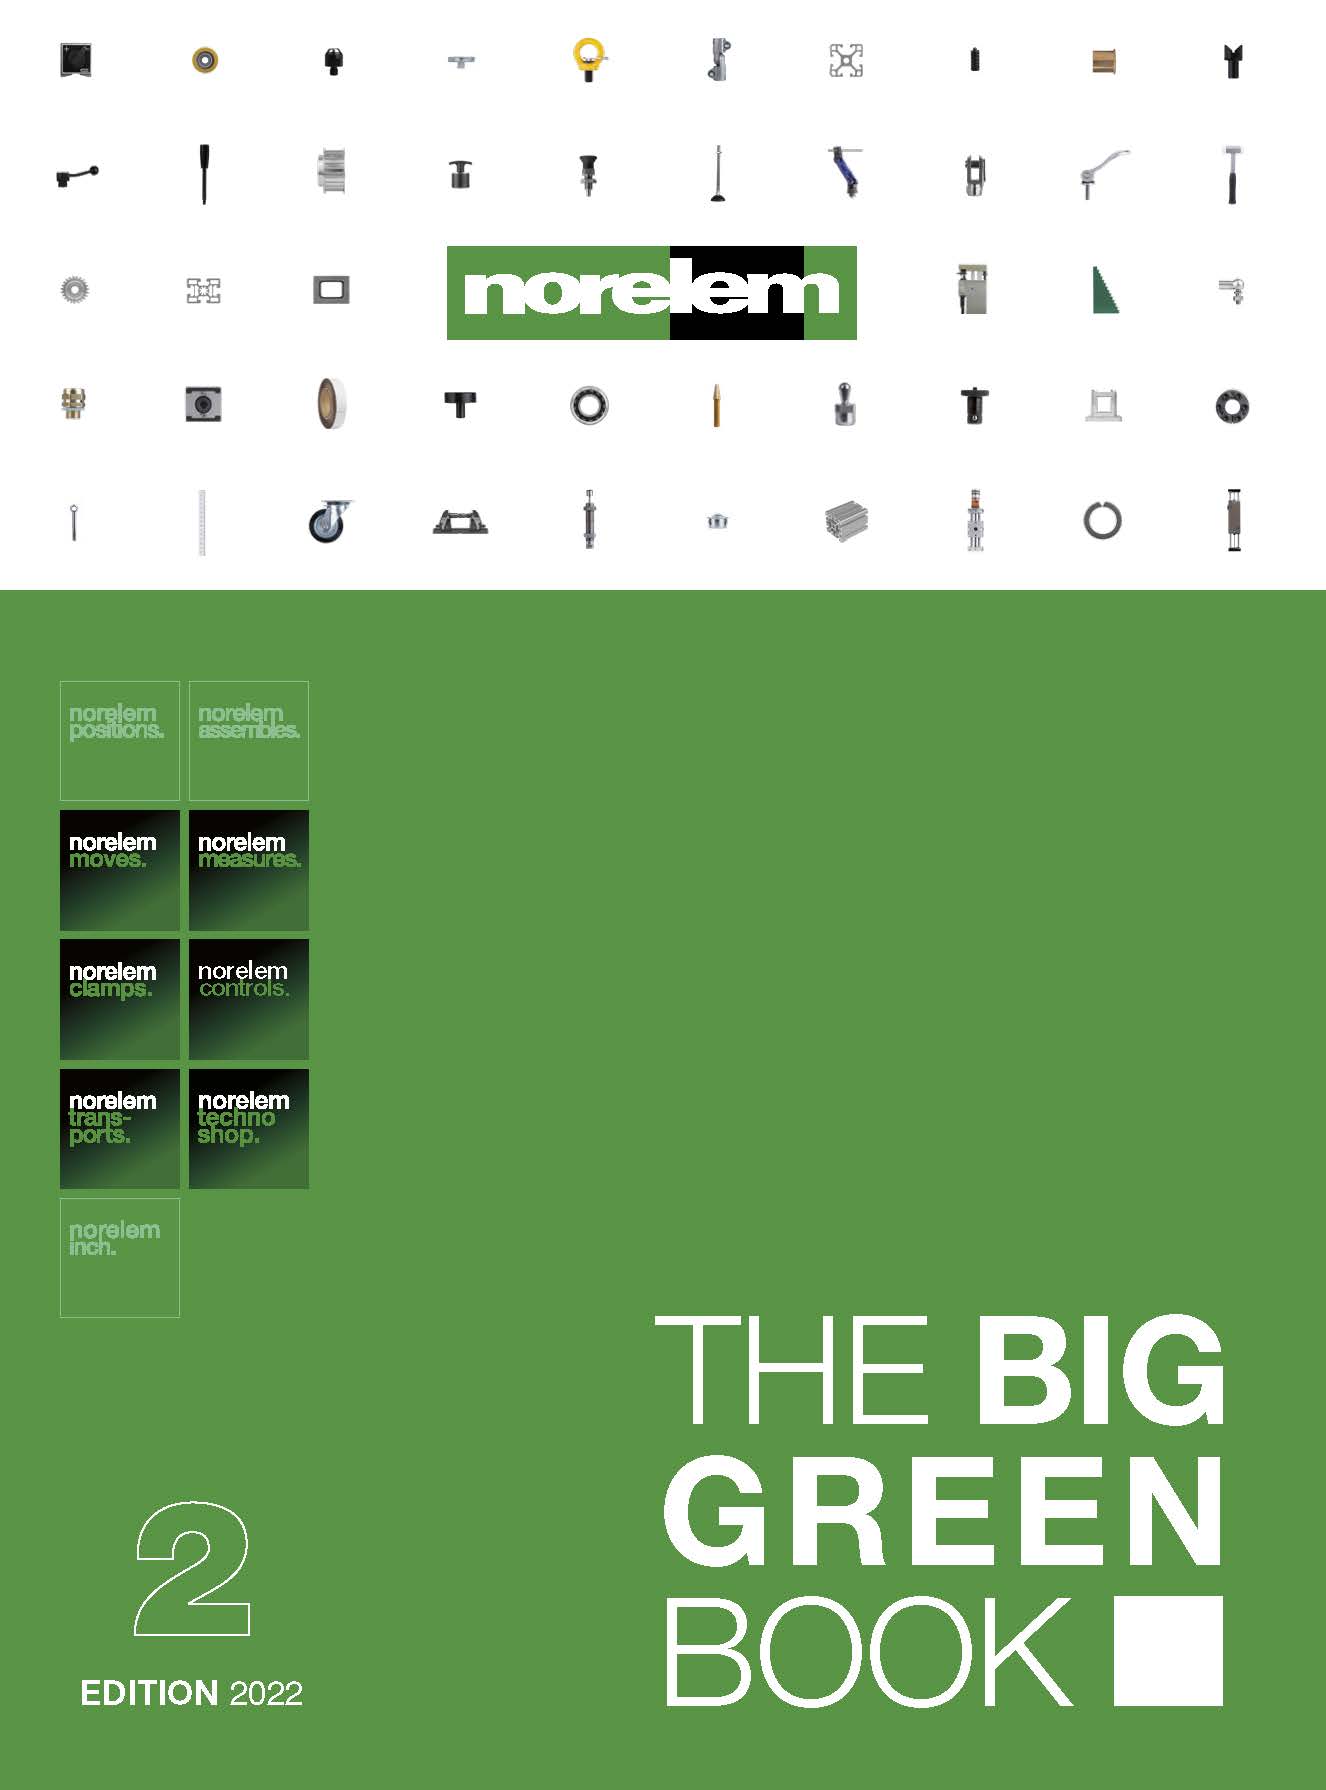 Excerpt from THE BIG GREEN BOOK Cover